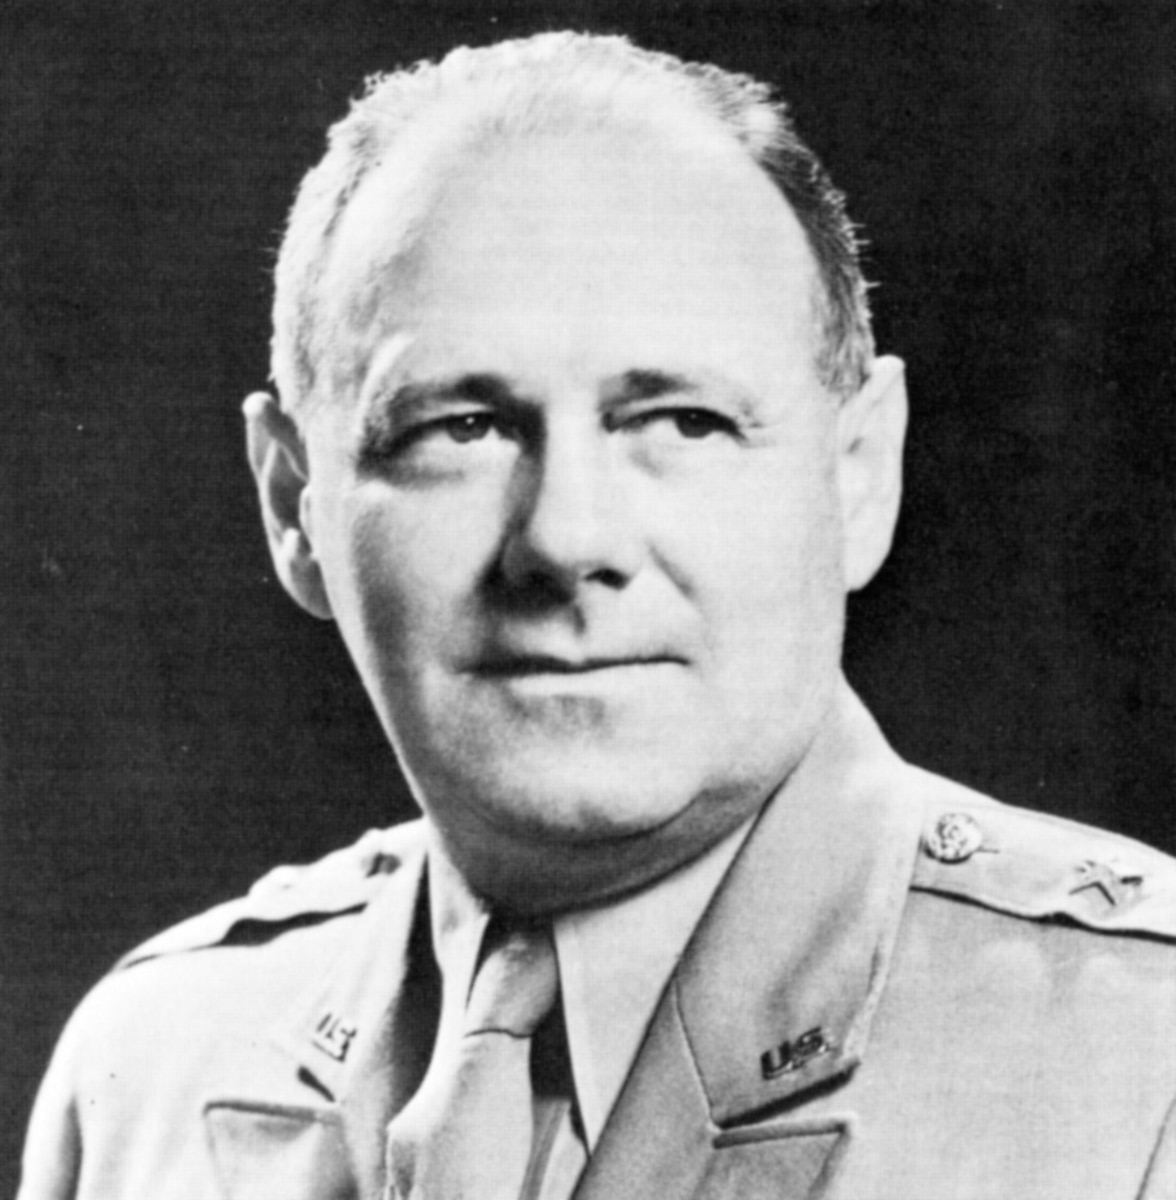 This is the official portrait of Brig. Gen. Clinton Howard.